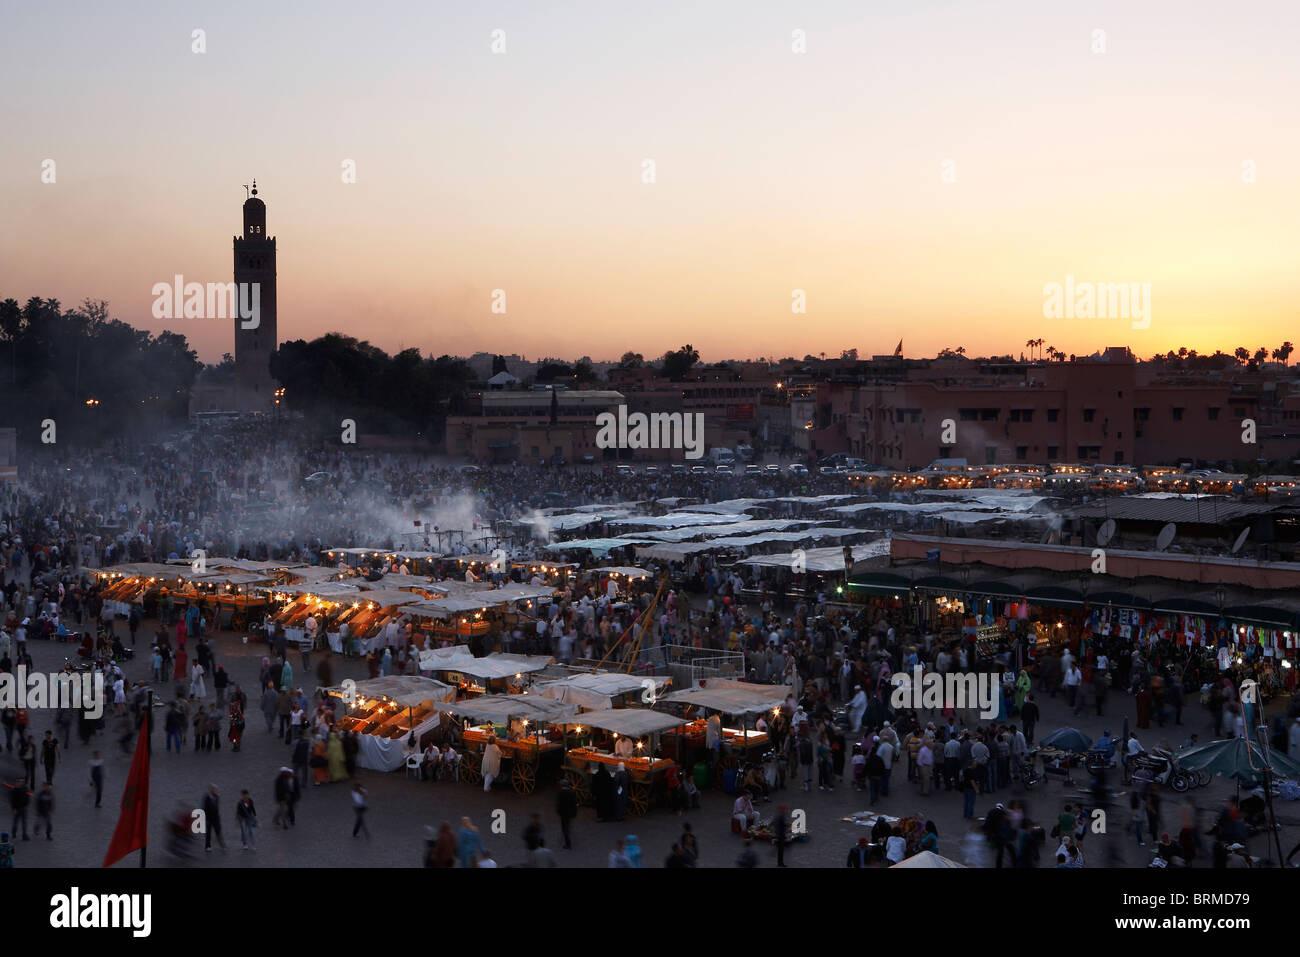 MARRAKESH: ELEVATED VIEW FOOD STALLS IN DJEMAA EL FNA AND KOUTOUBIA MOSQUE AT SUNSET Stock Photo